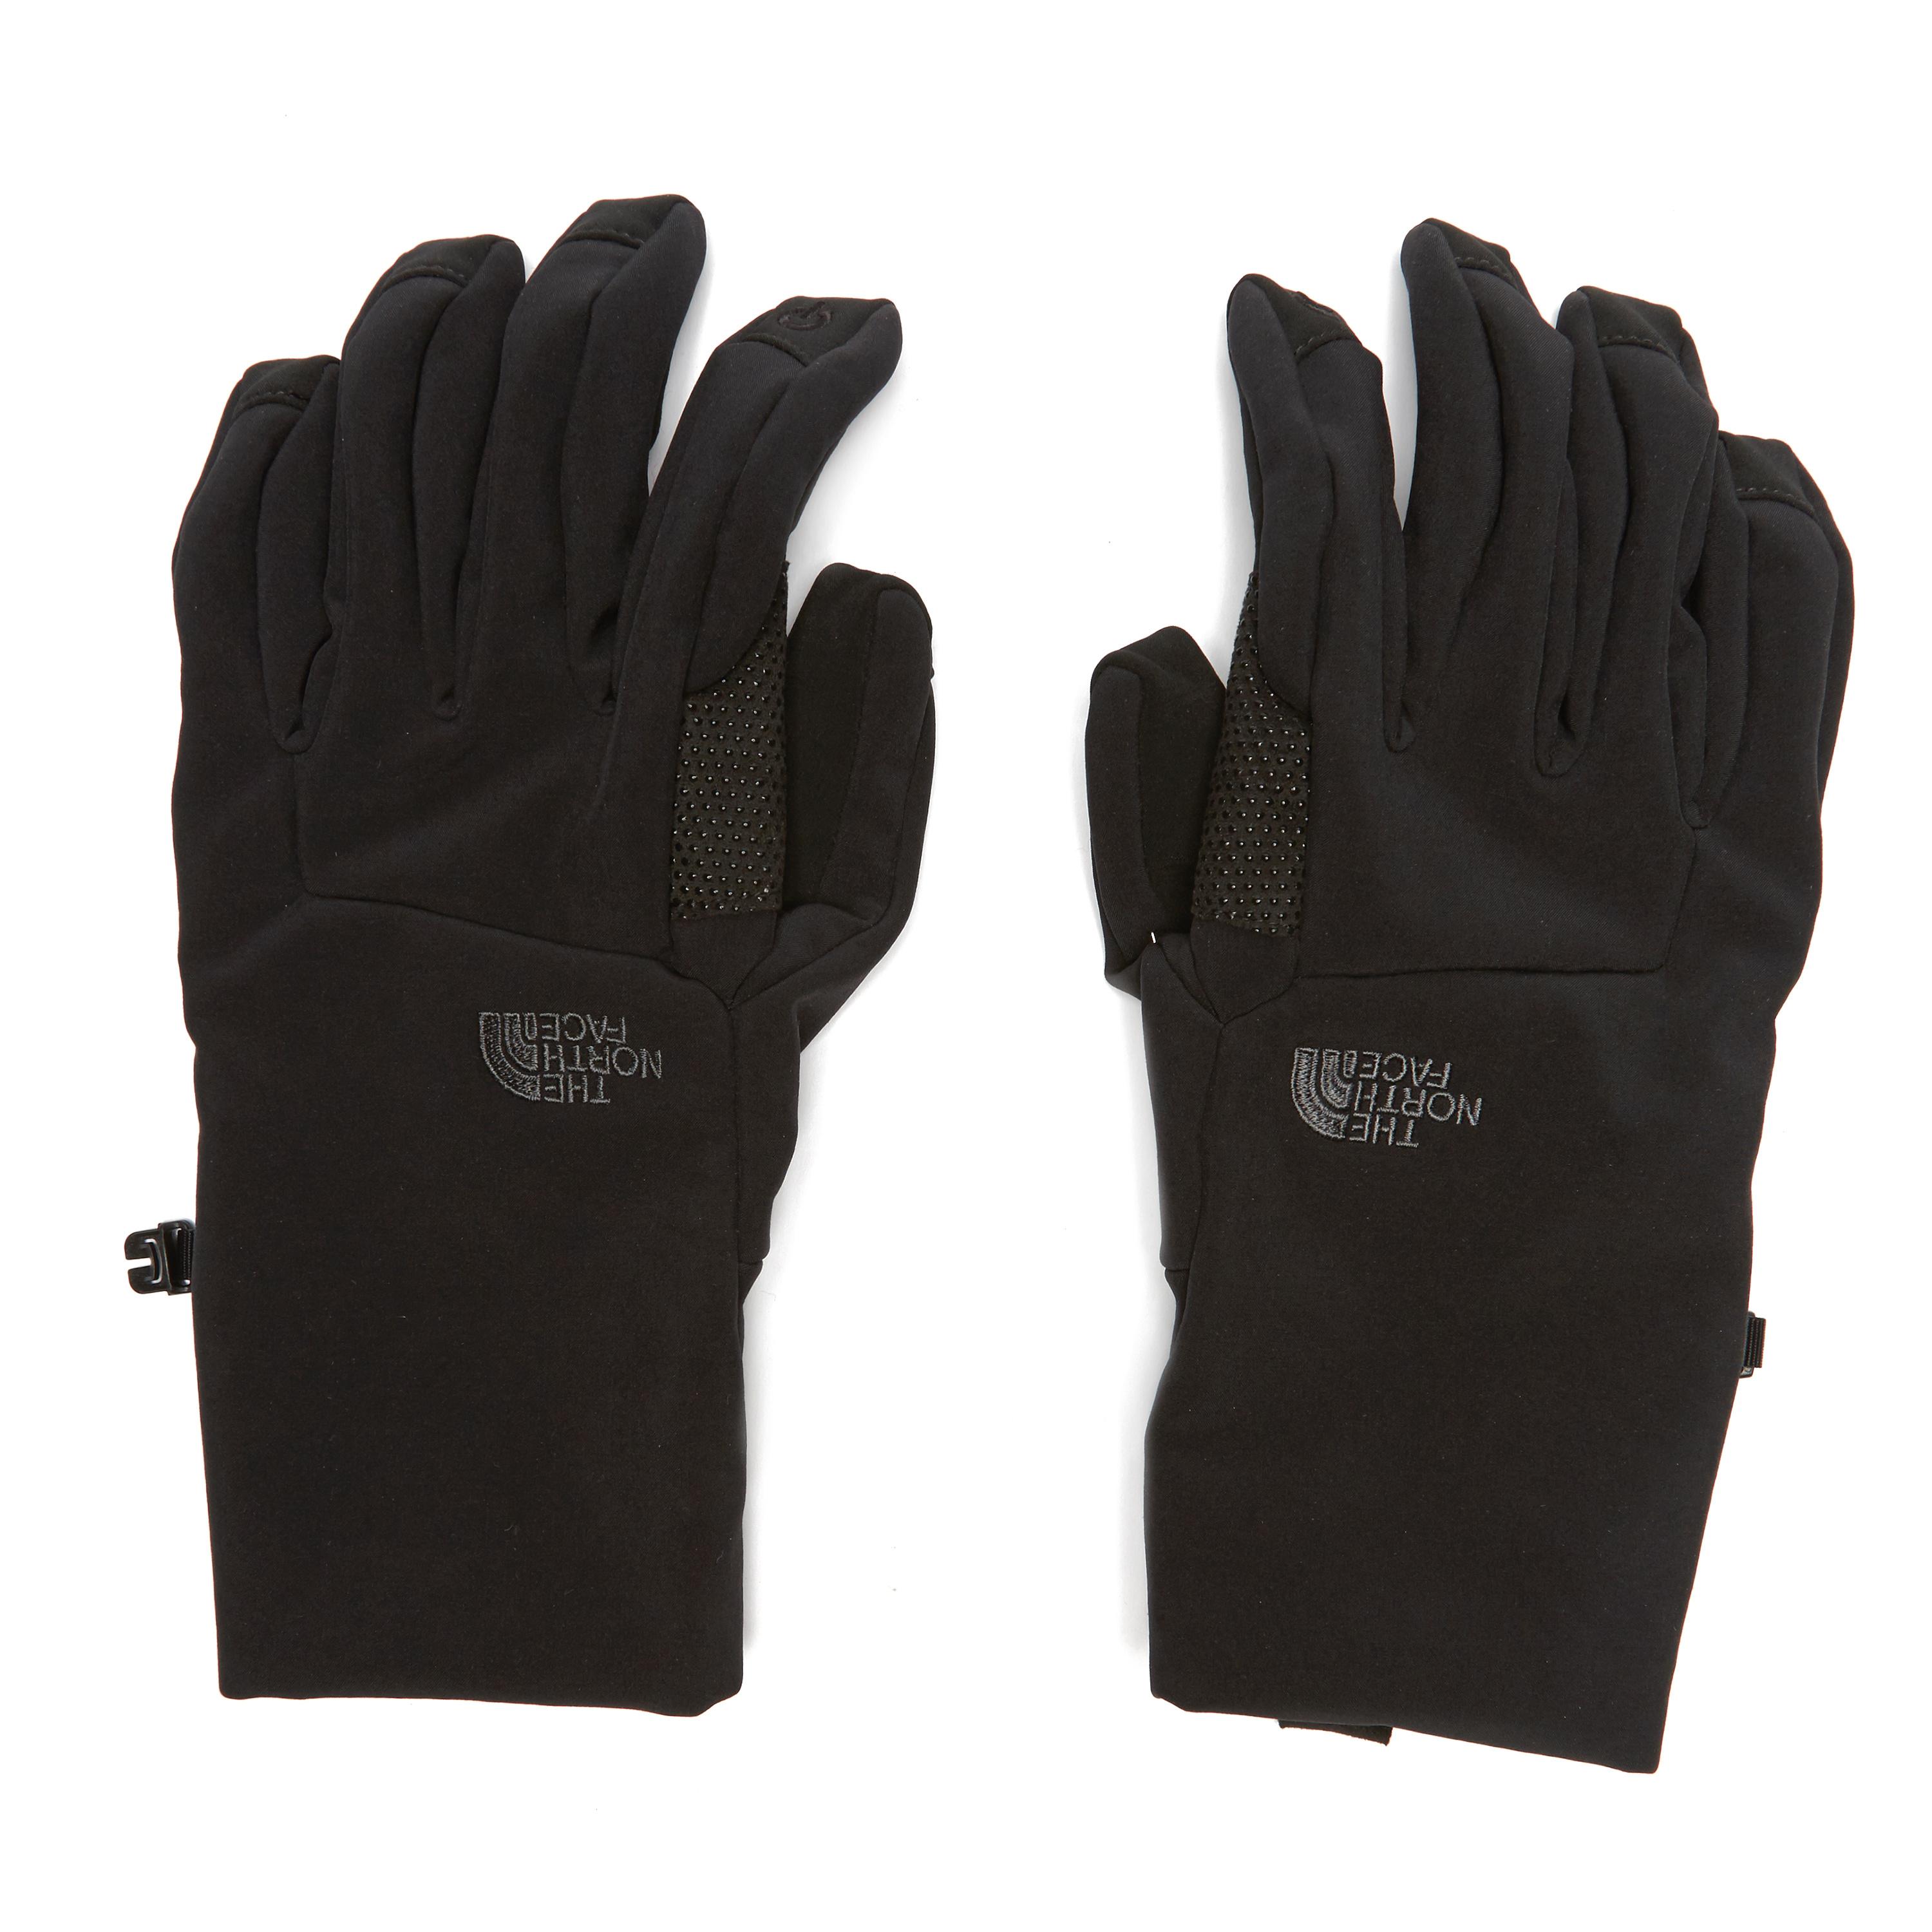 north face gloves waterproof